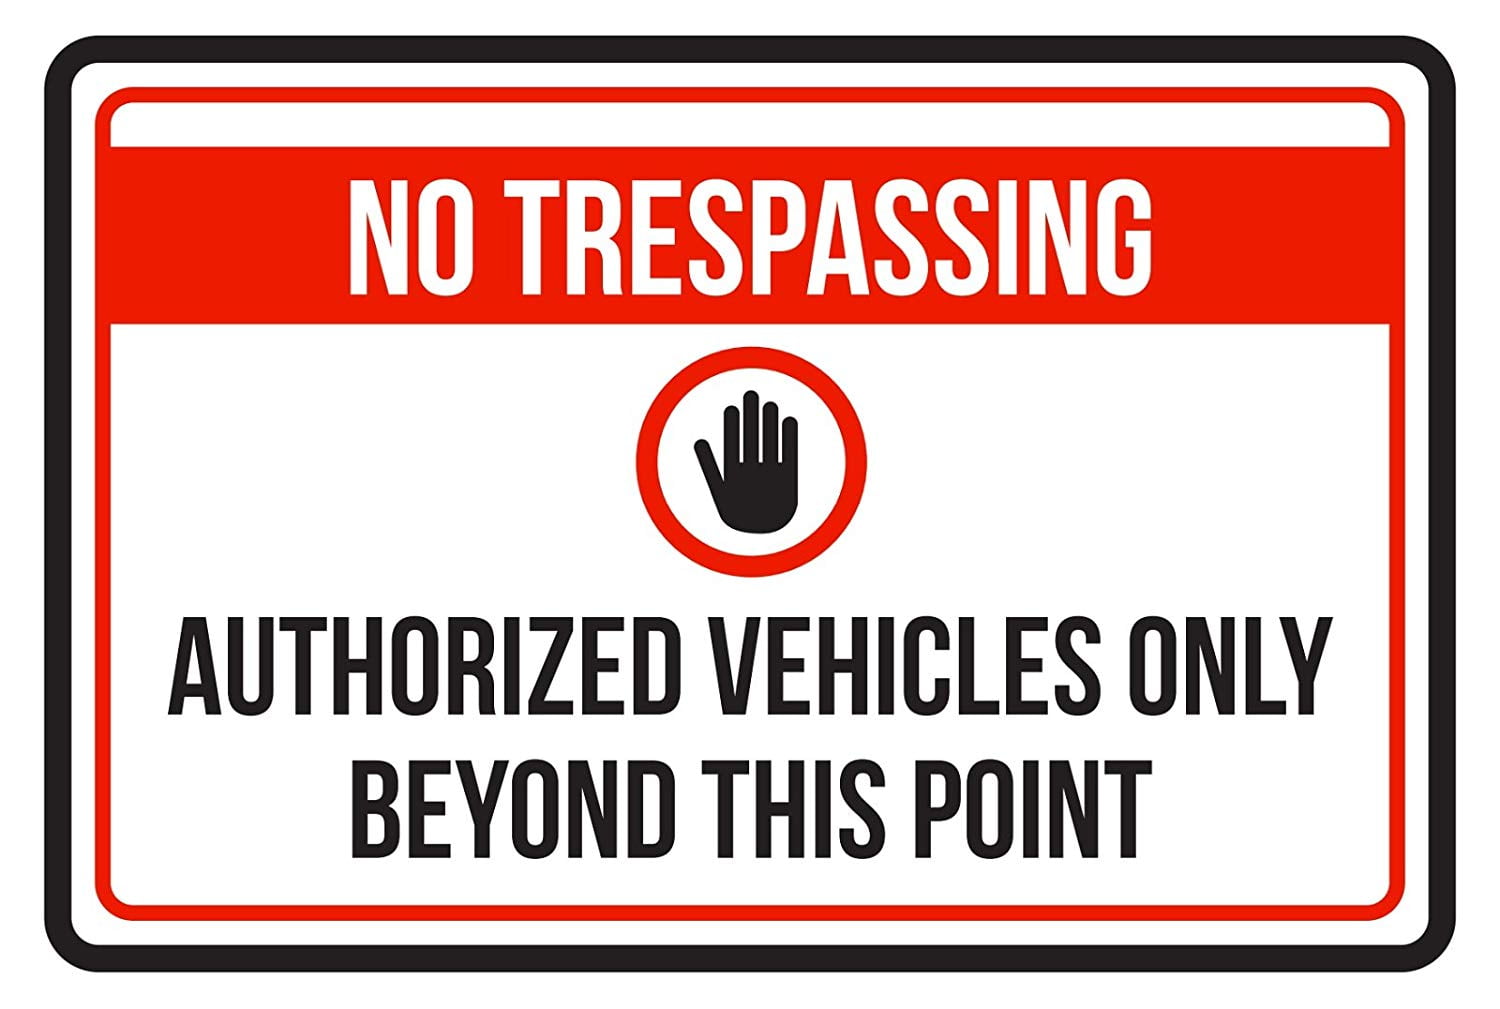 No Trespassing Authorized Vehicles Only Beyond This Point Business